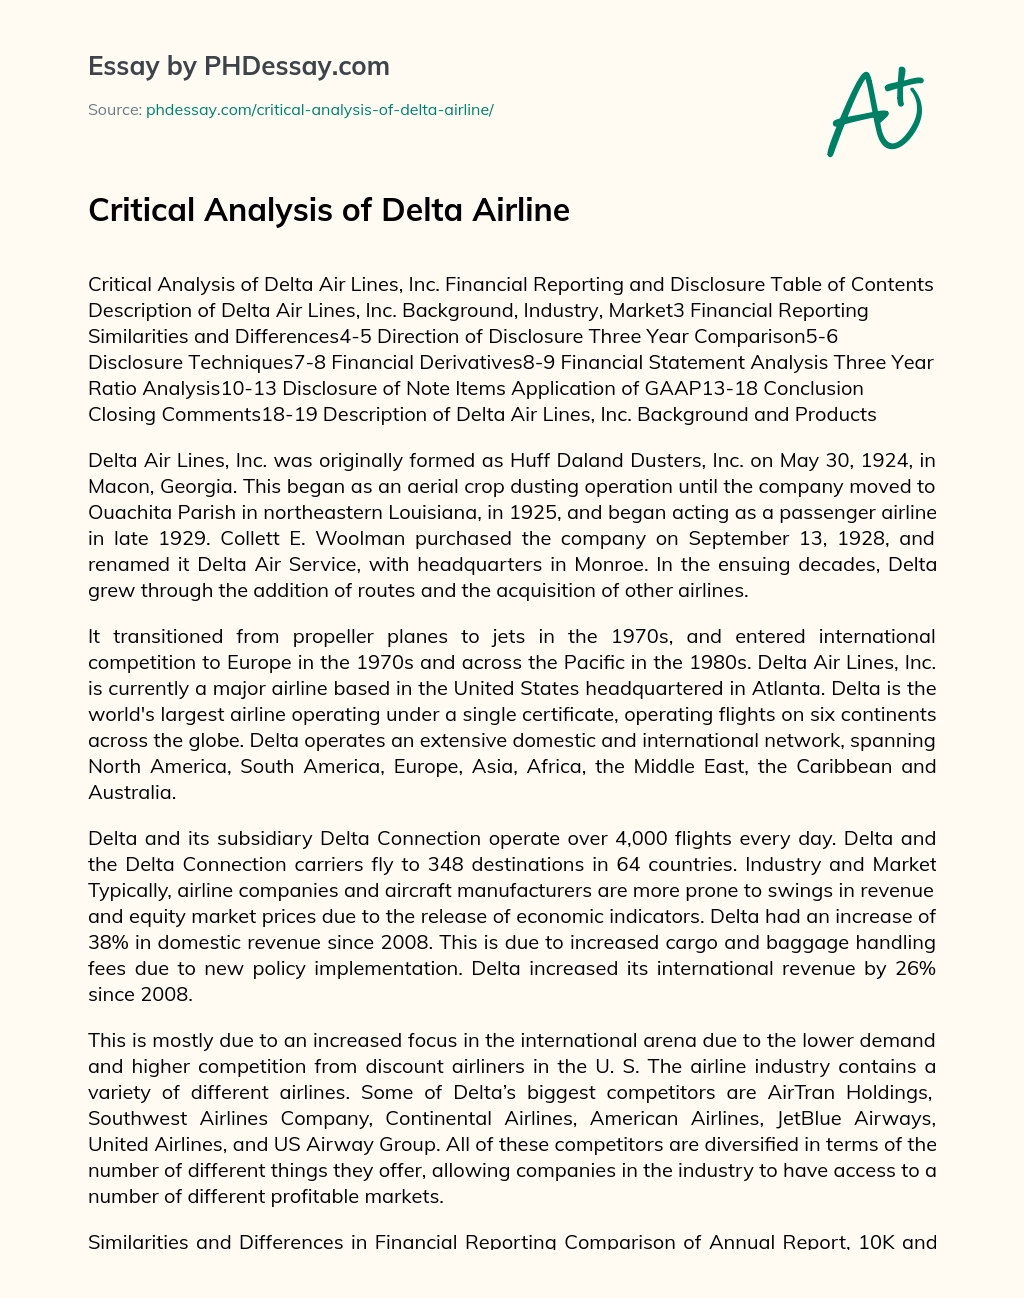 Critical Analysis of Delta Airline essay